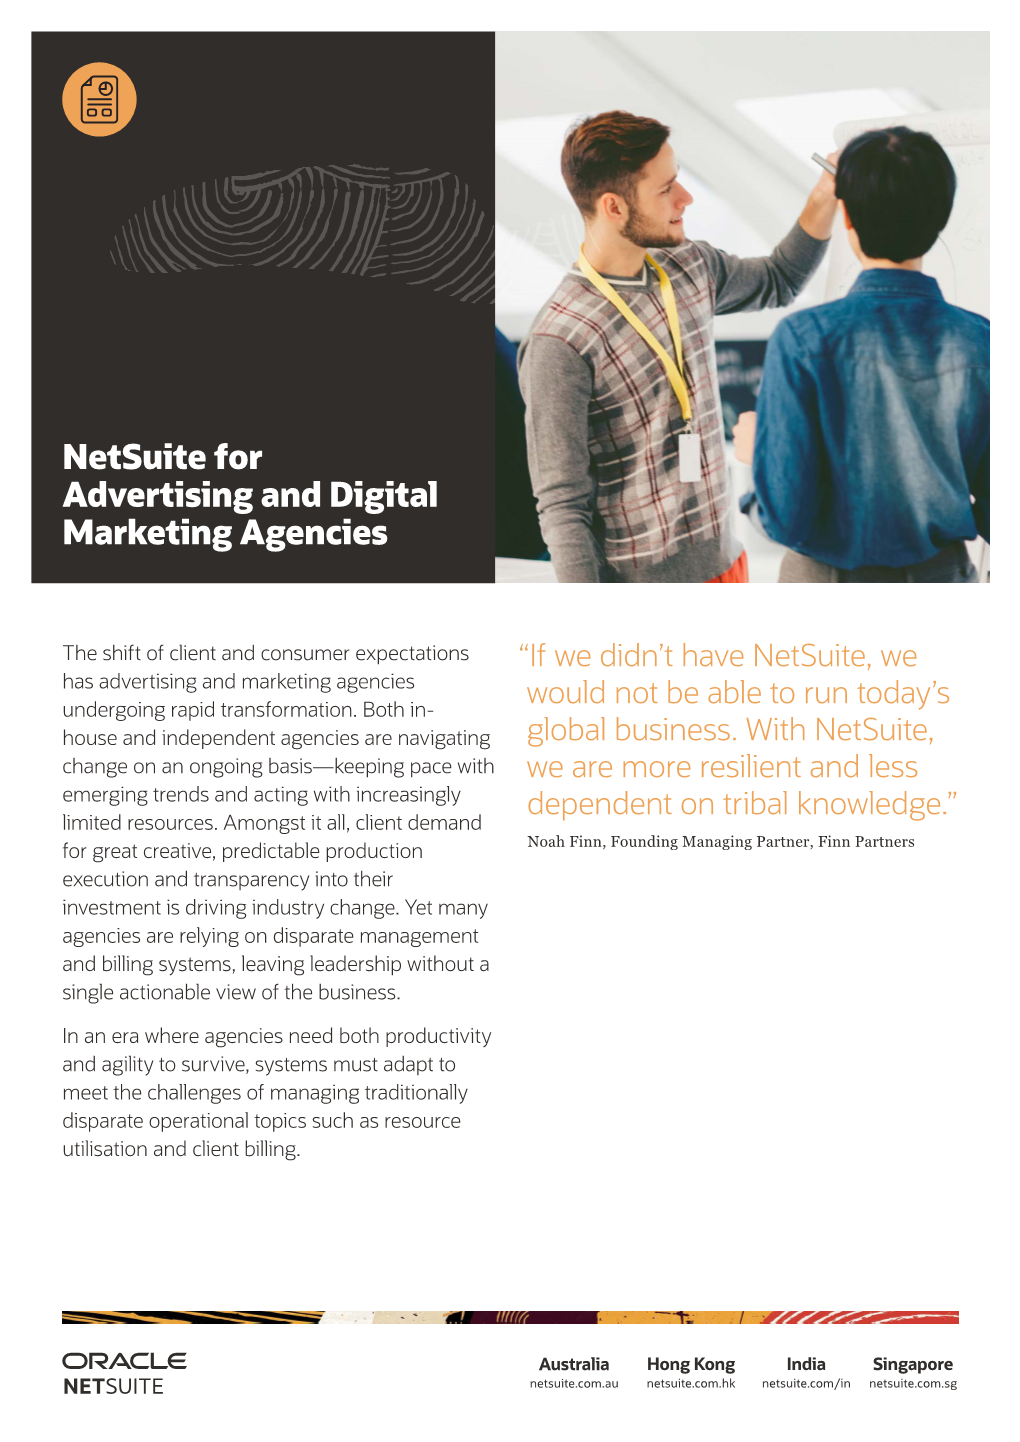 Netsuite for Advertising and Digital Marketing Agencies